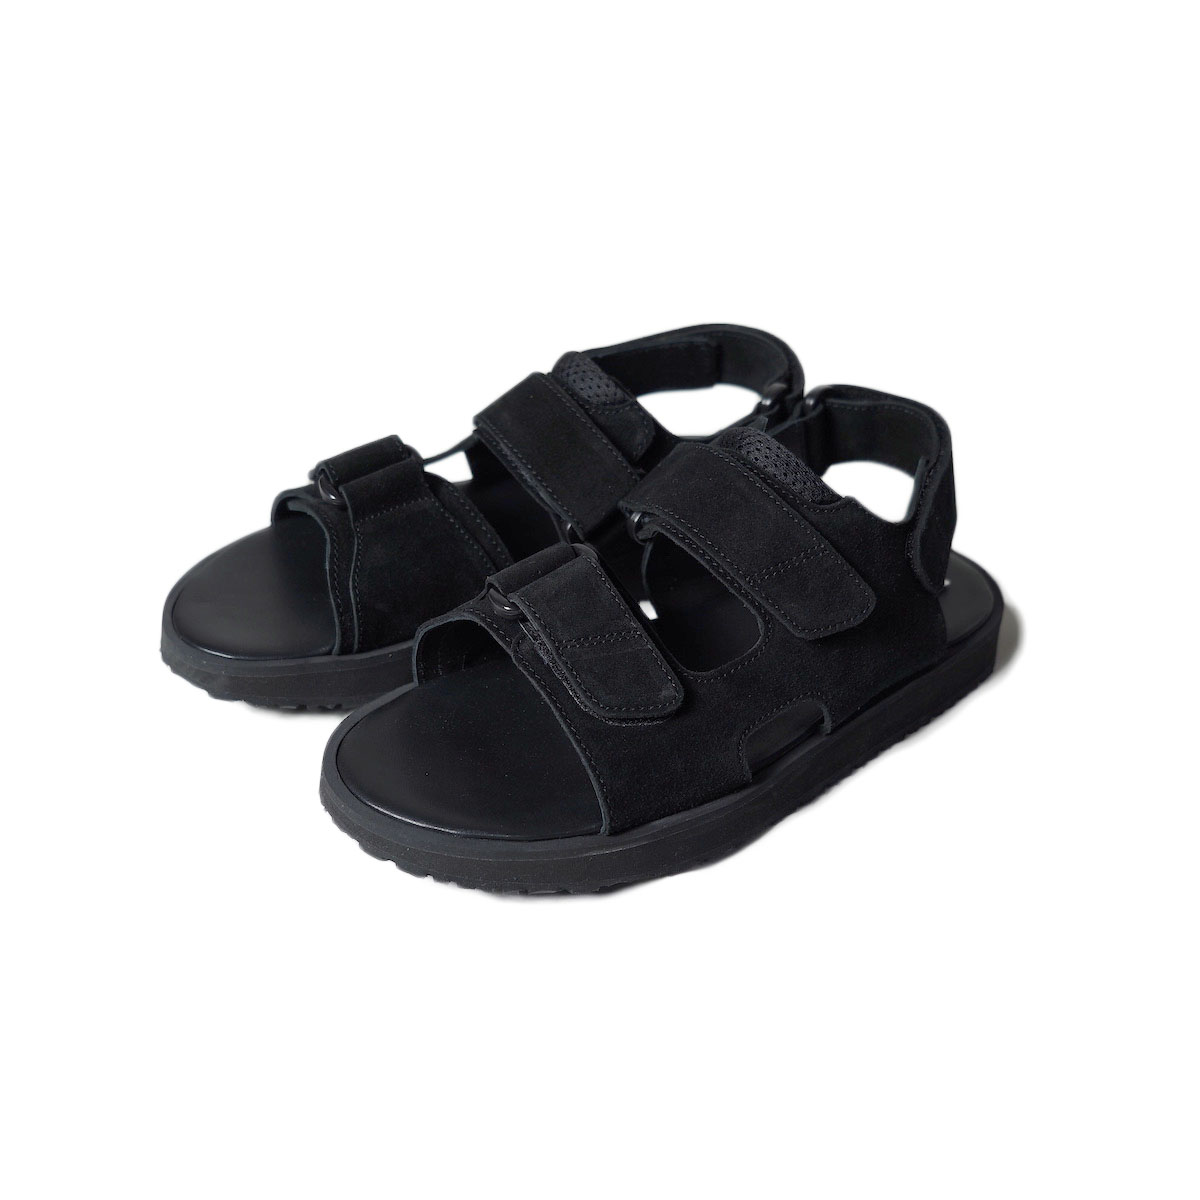 REPRODUCTION OF FOUND / BRITISH MILITARY SANDAL (Black Suede)